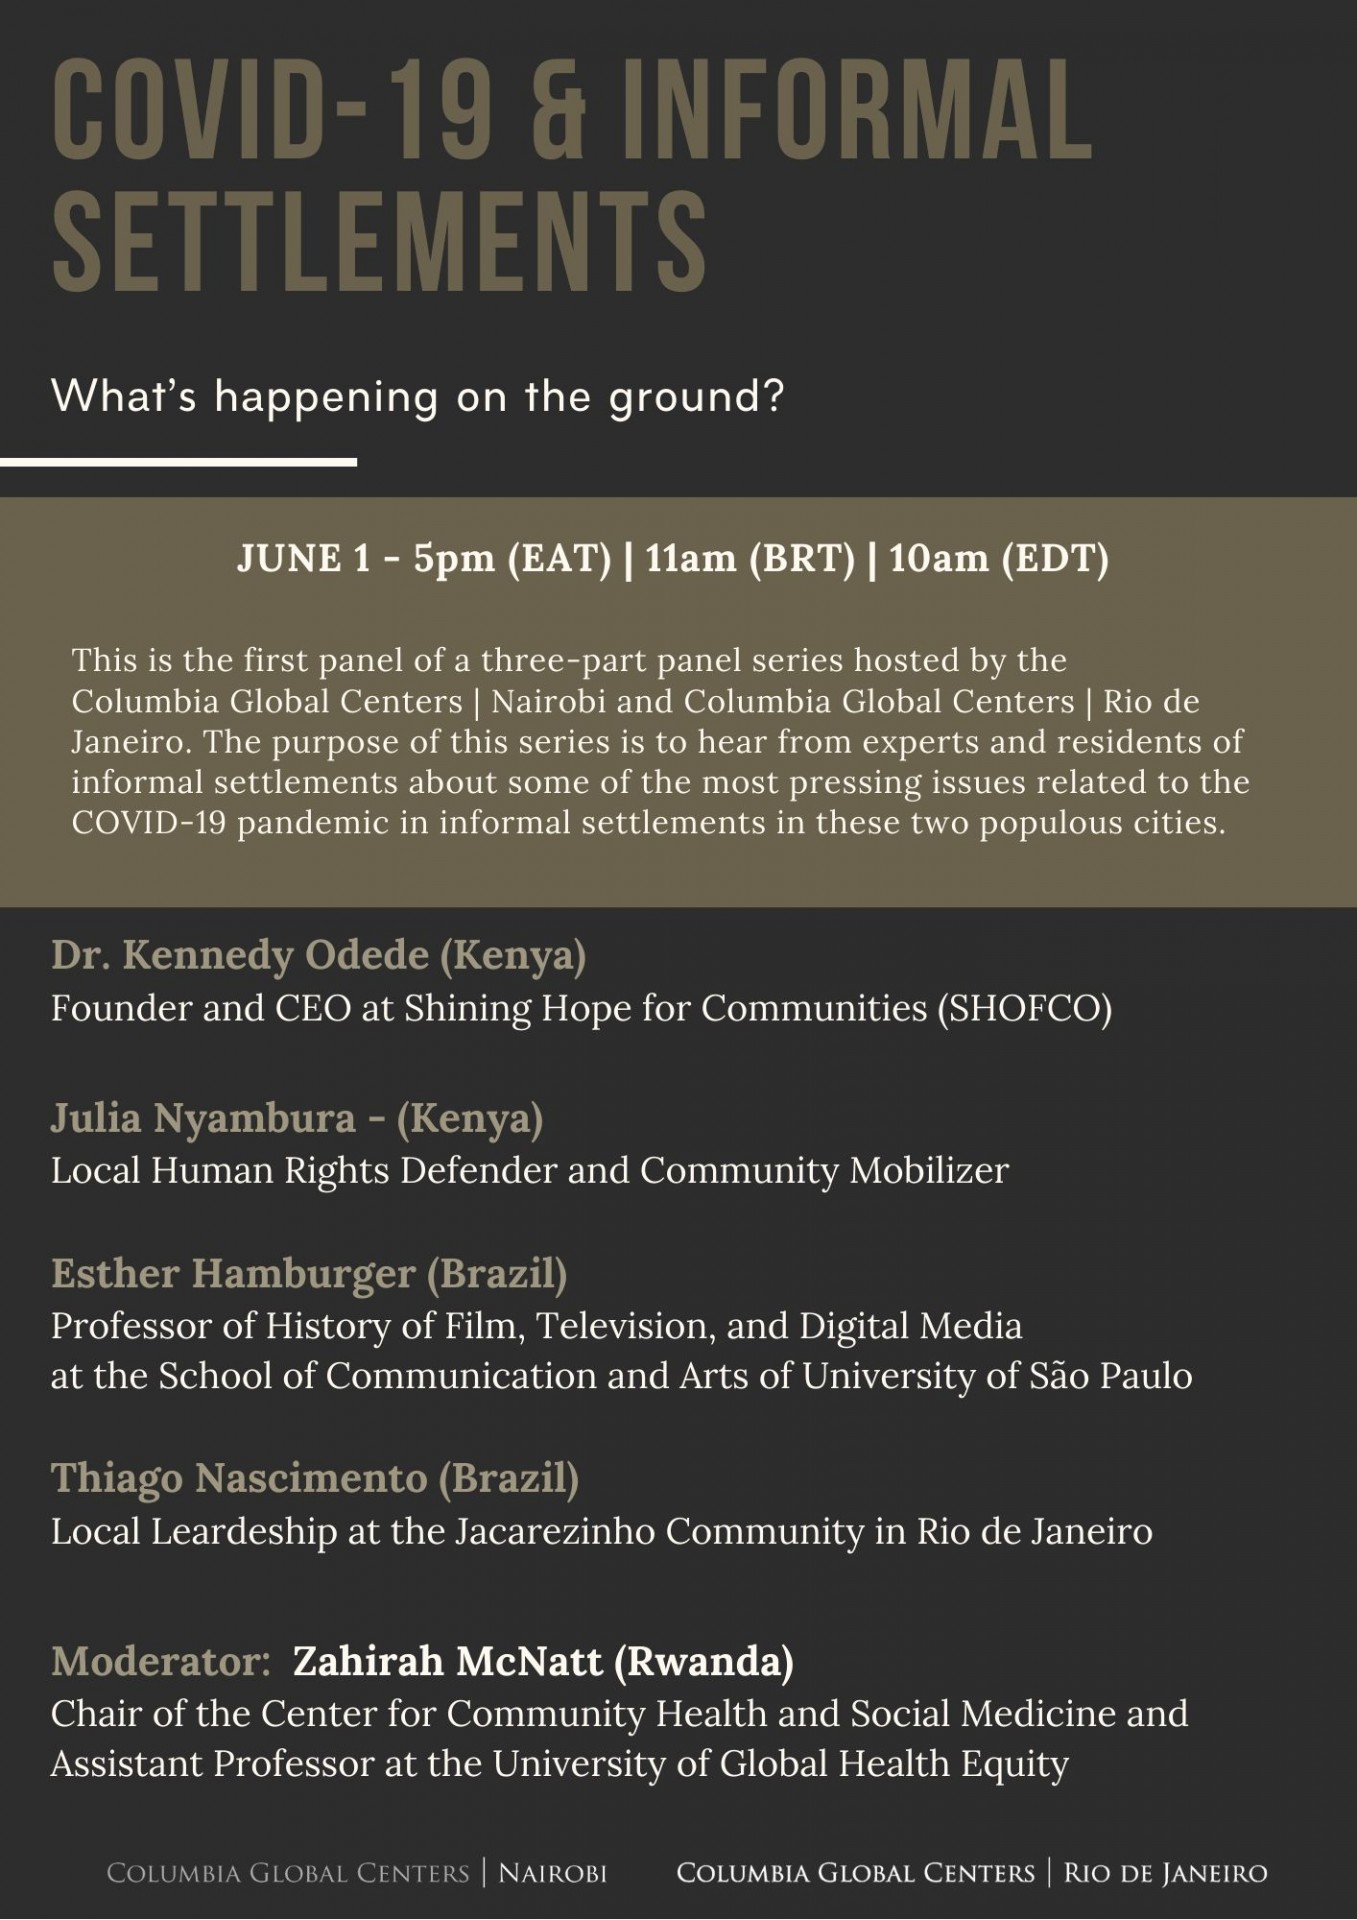 COVID-19 & informal settlements: What’s happening on the ground in Brazil and Kenya?